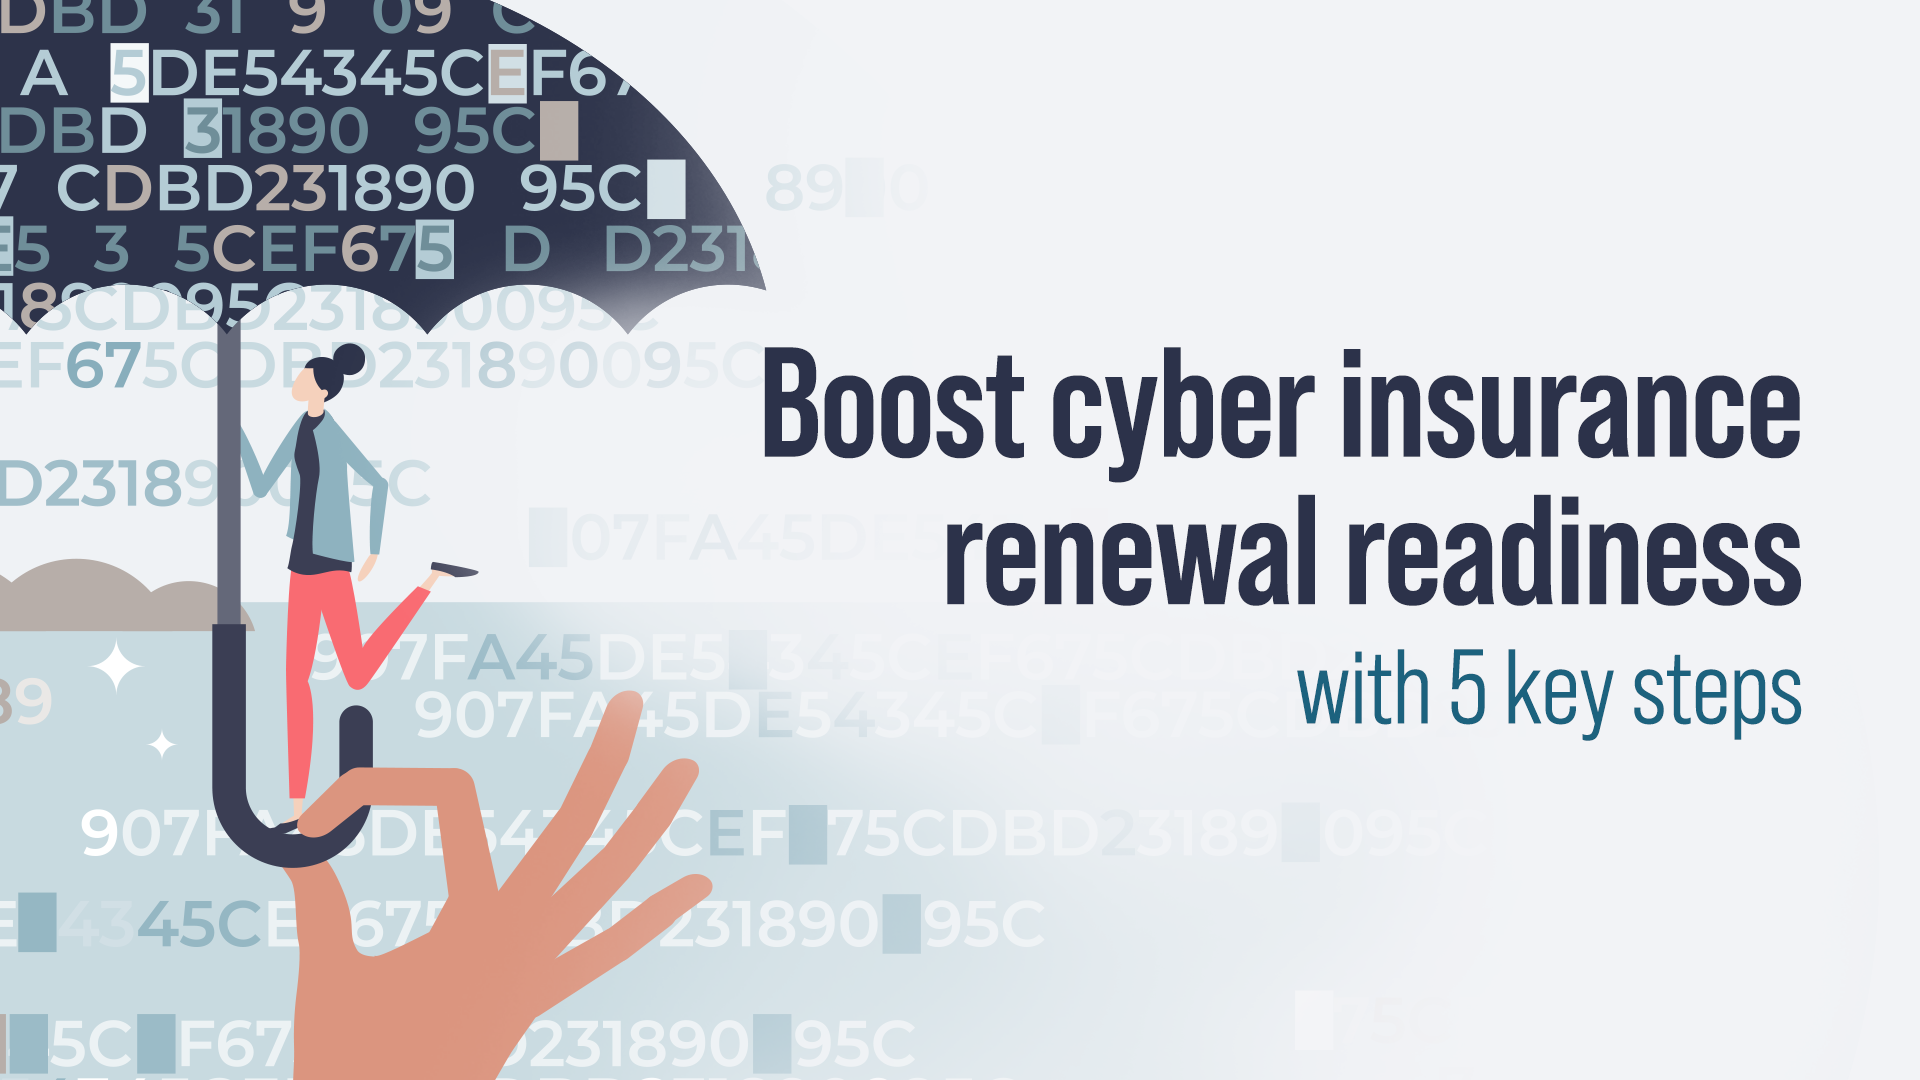 Boost cyber insurance renewal readiness with 5 key steps